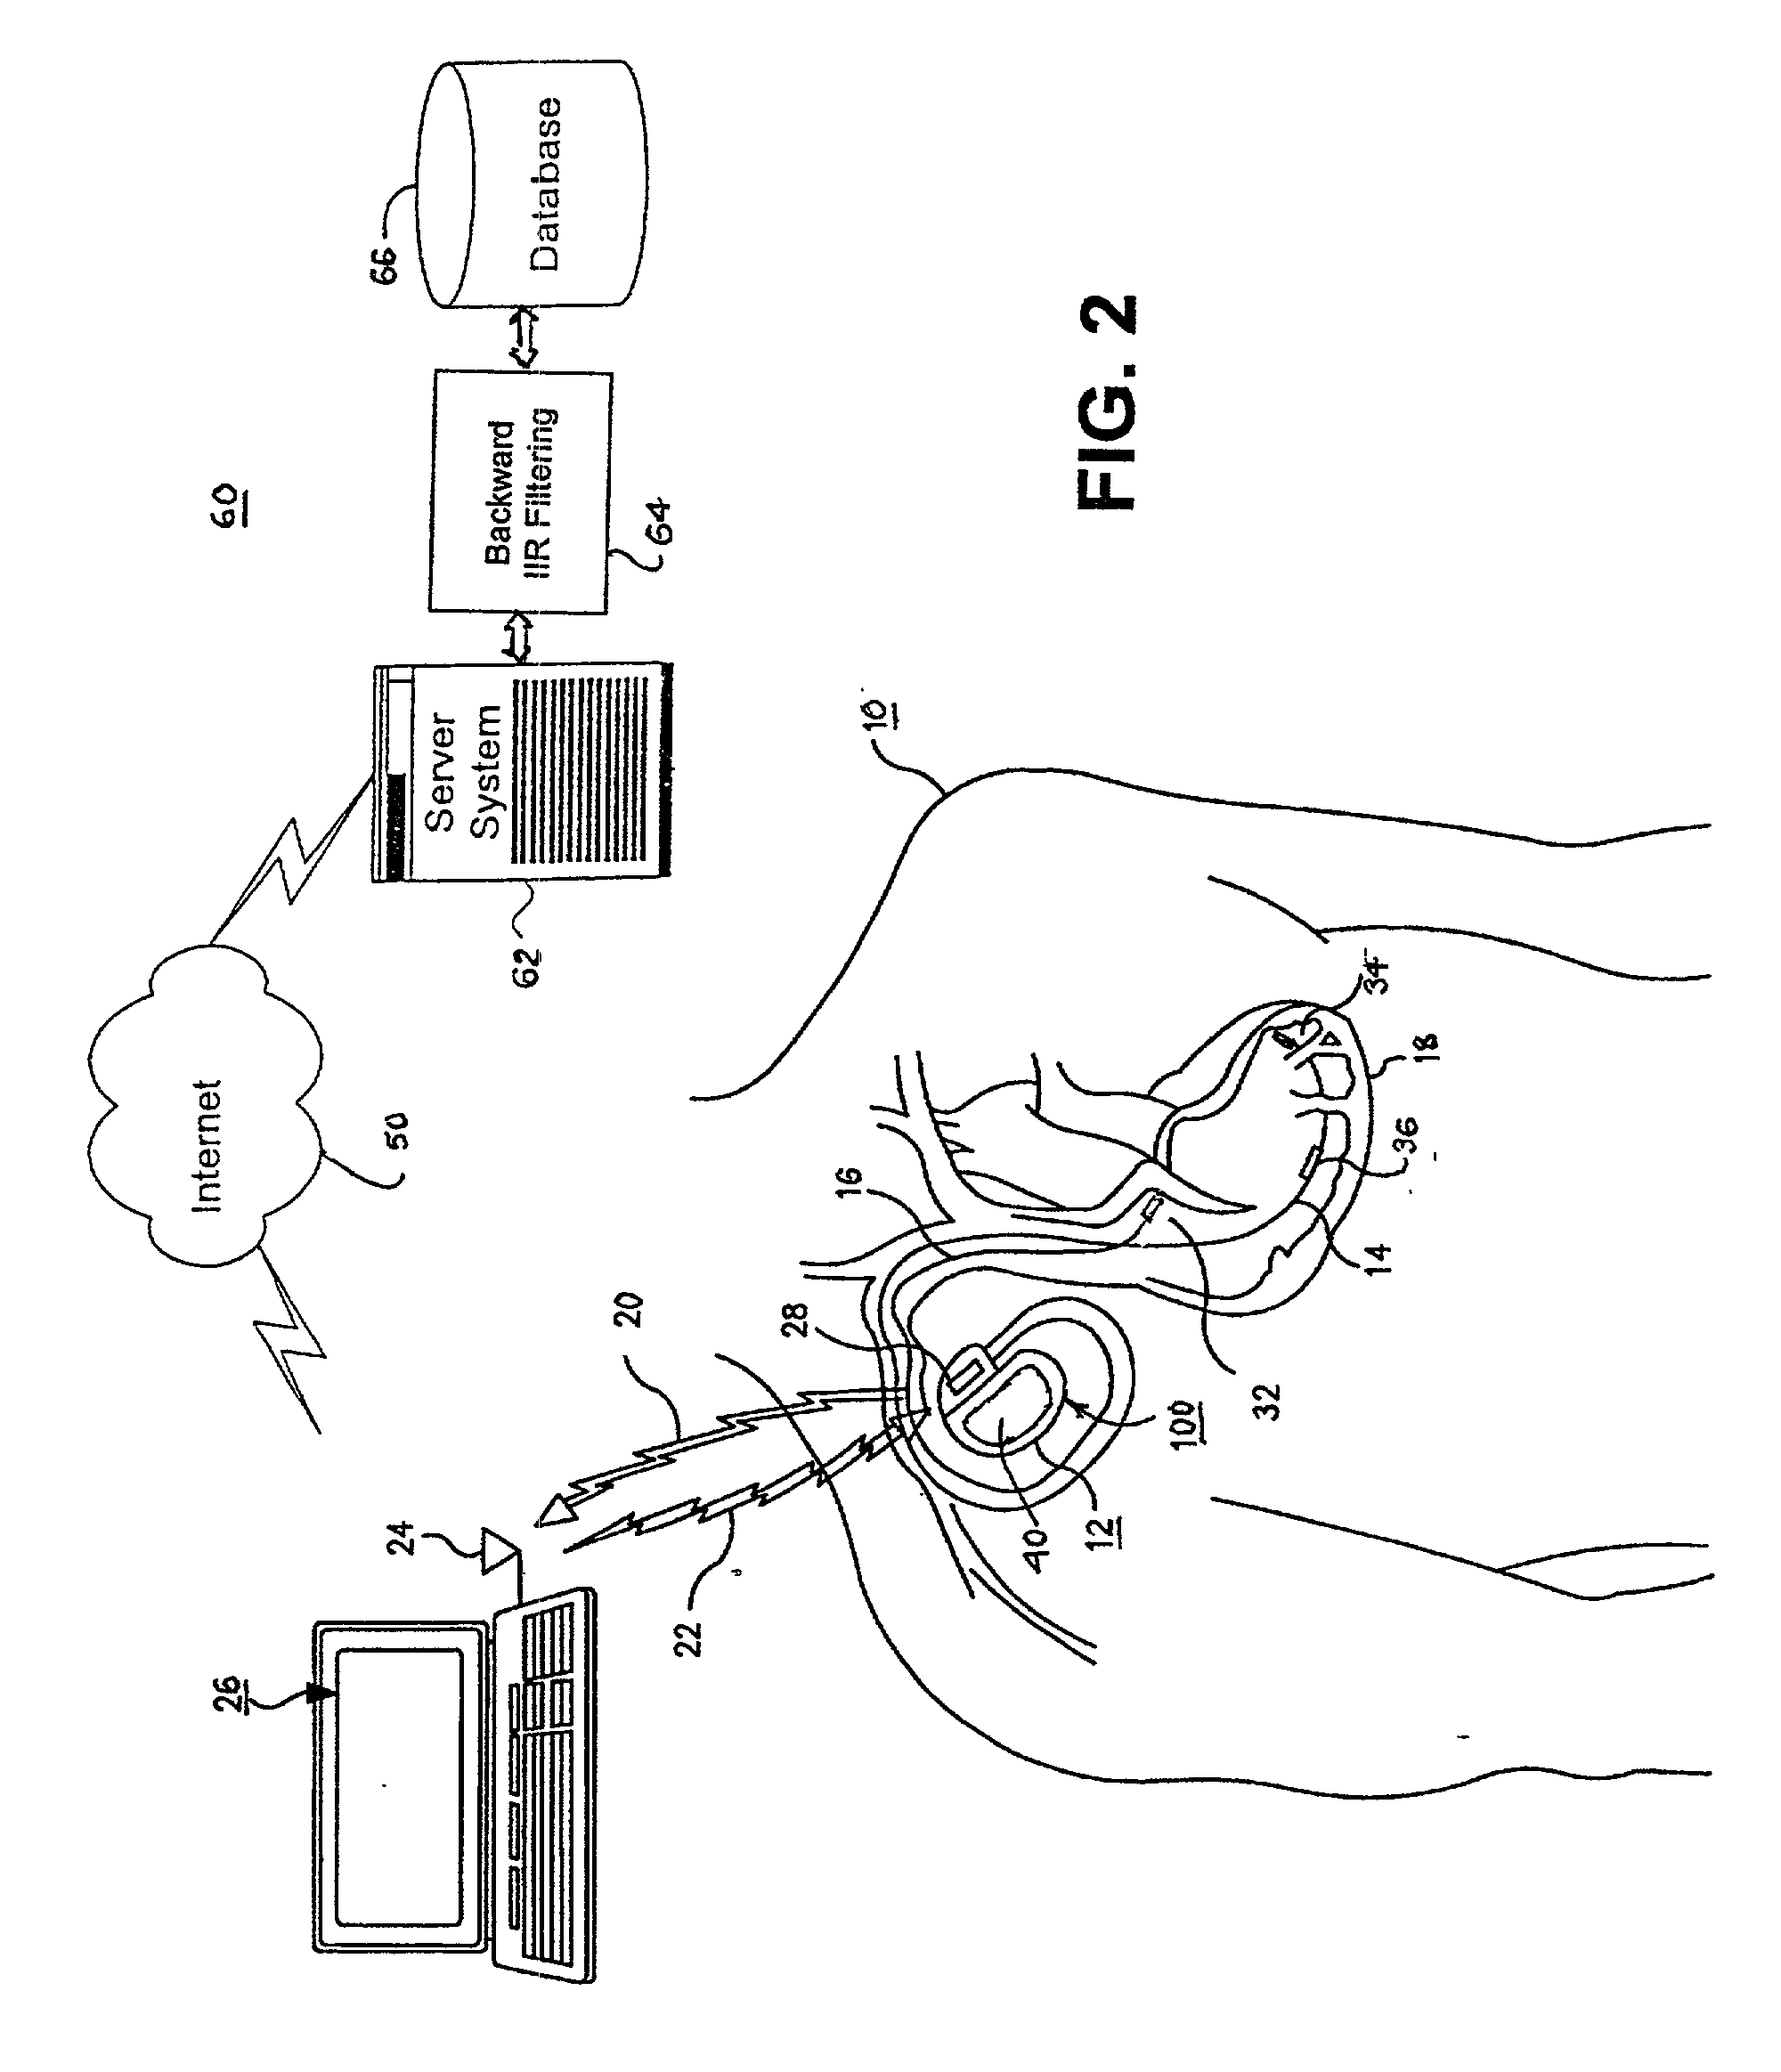 Methods and apparatus for filtering EGM signals detected by an implantable medical device